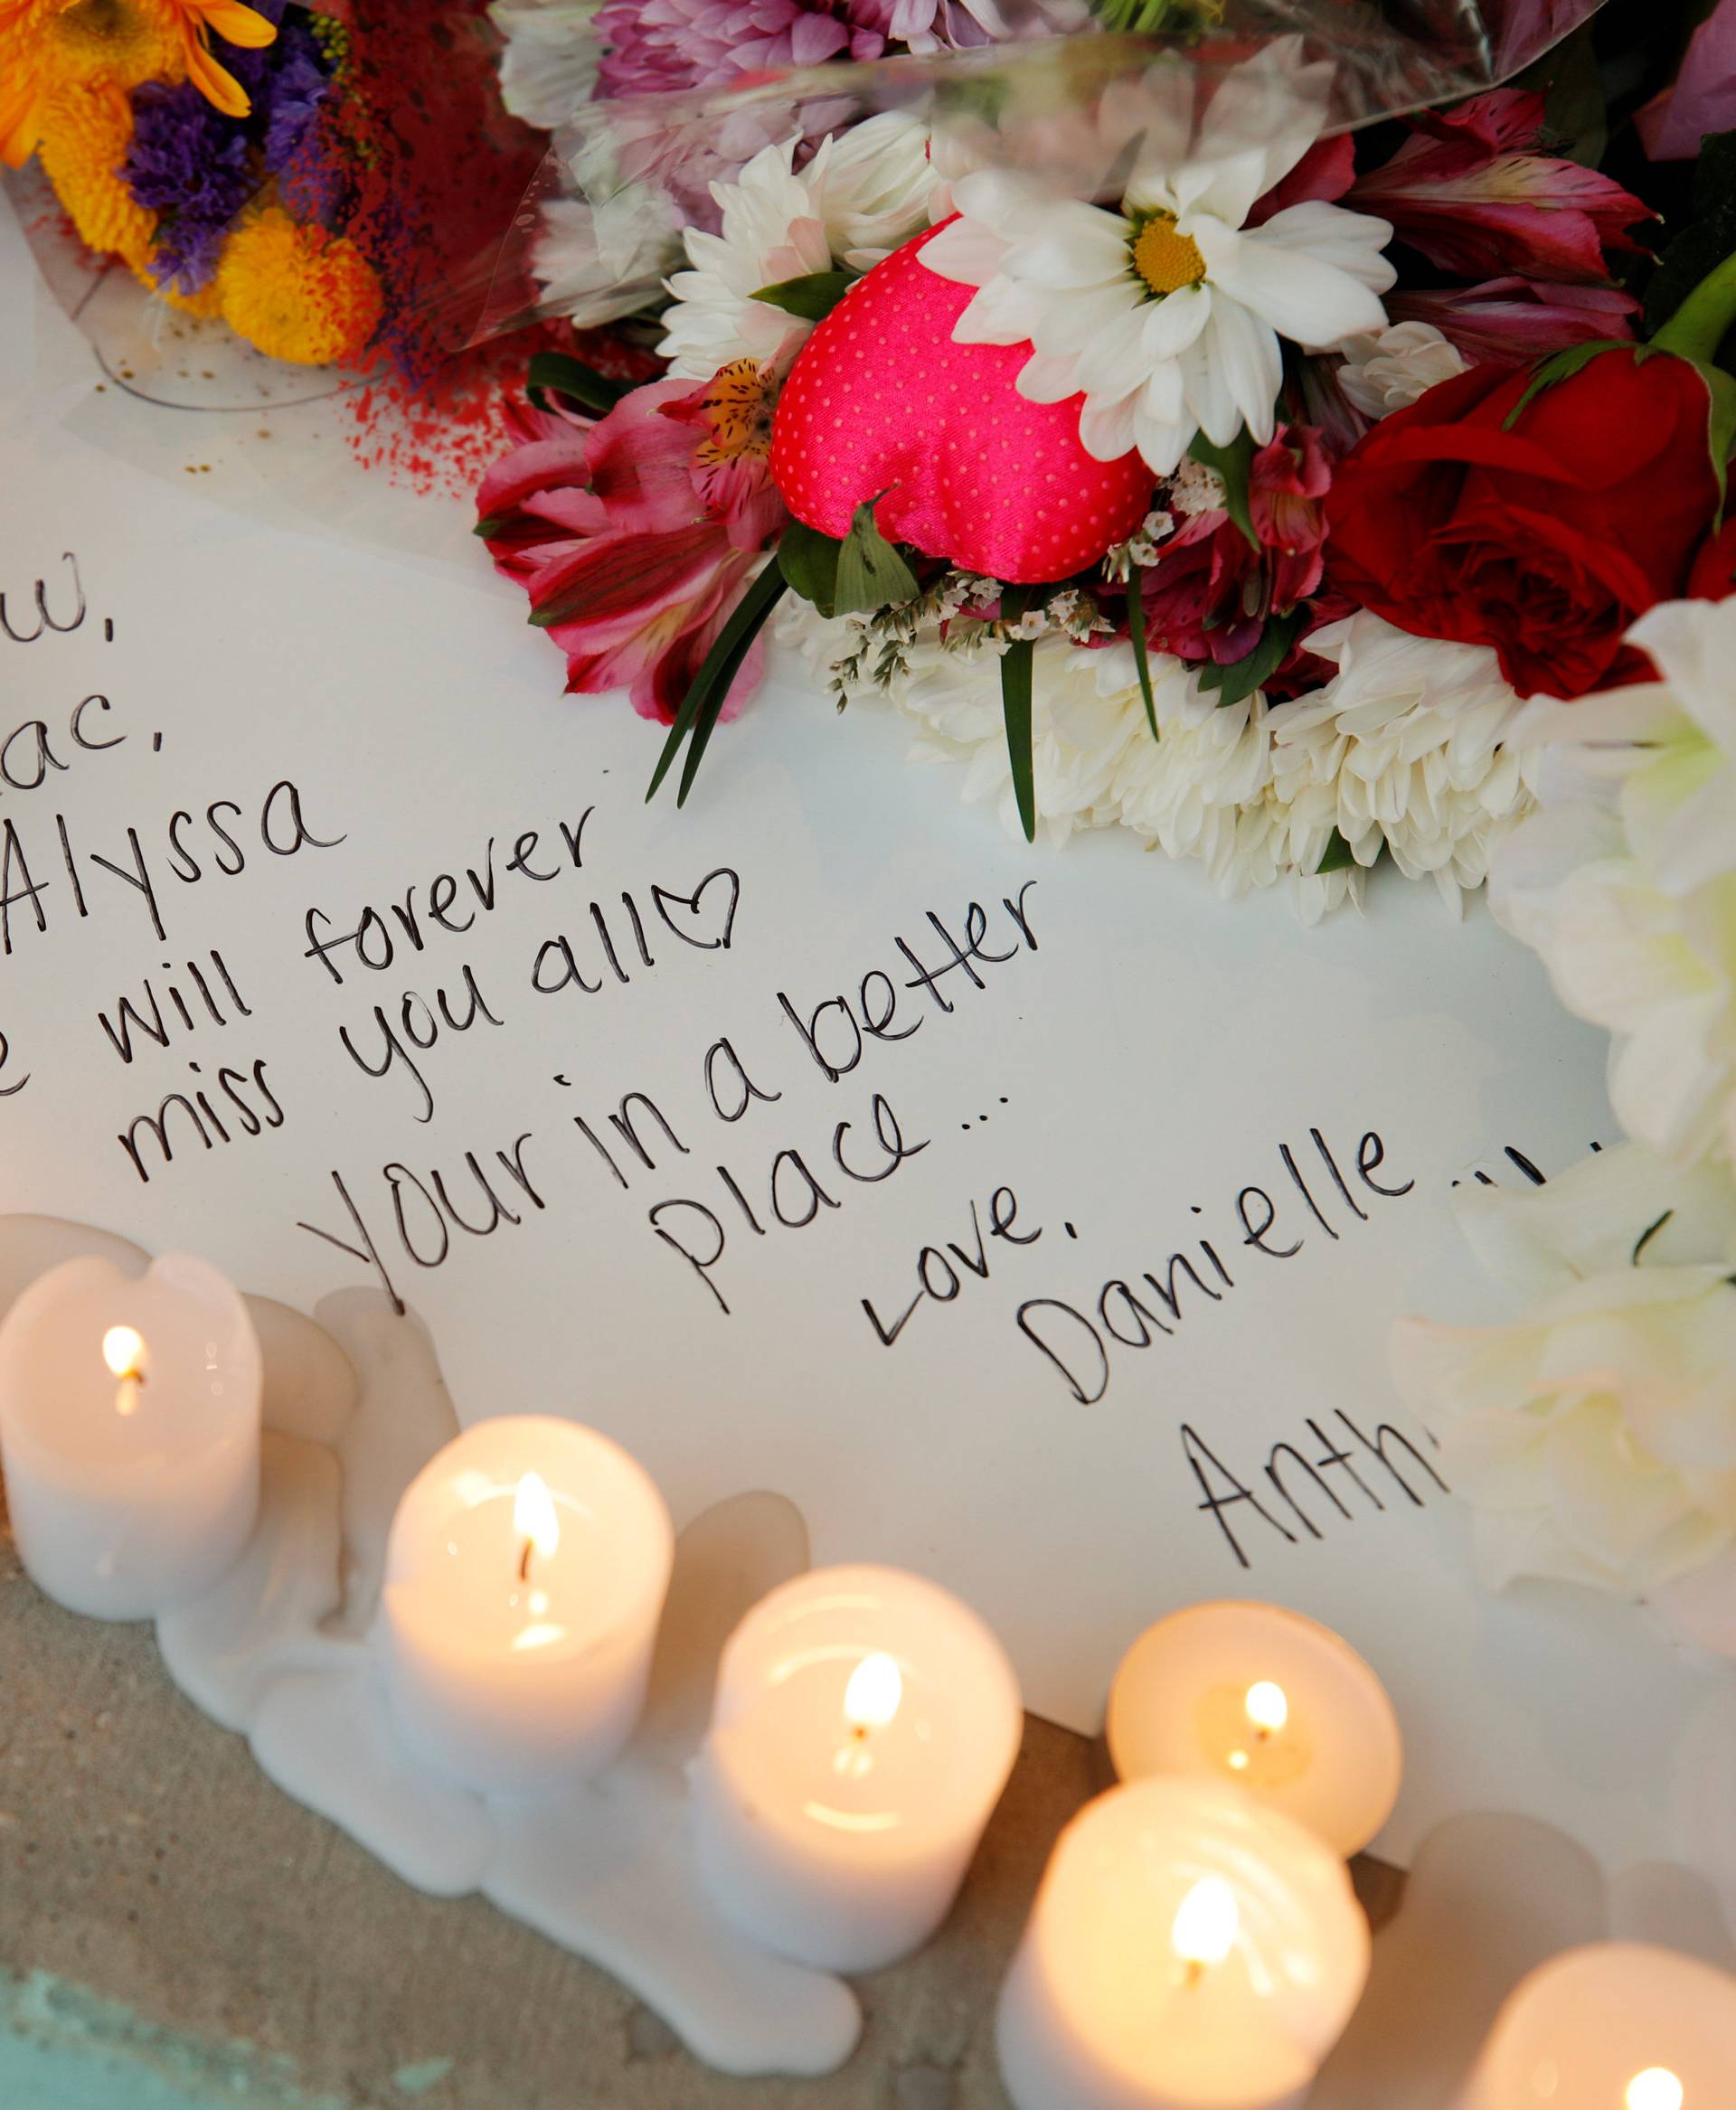 A handwritten note to a lost friend is surrounded by candles and flowers at a candlelight vigil the day after a shooting at Marjory Stoneman Douglas High School in Parkland